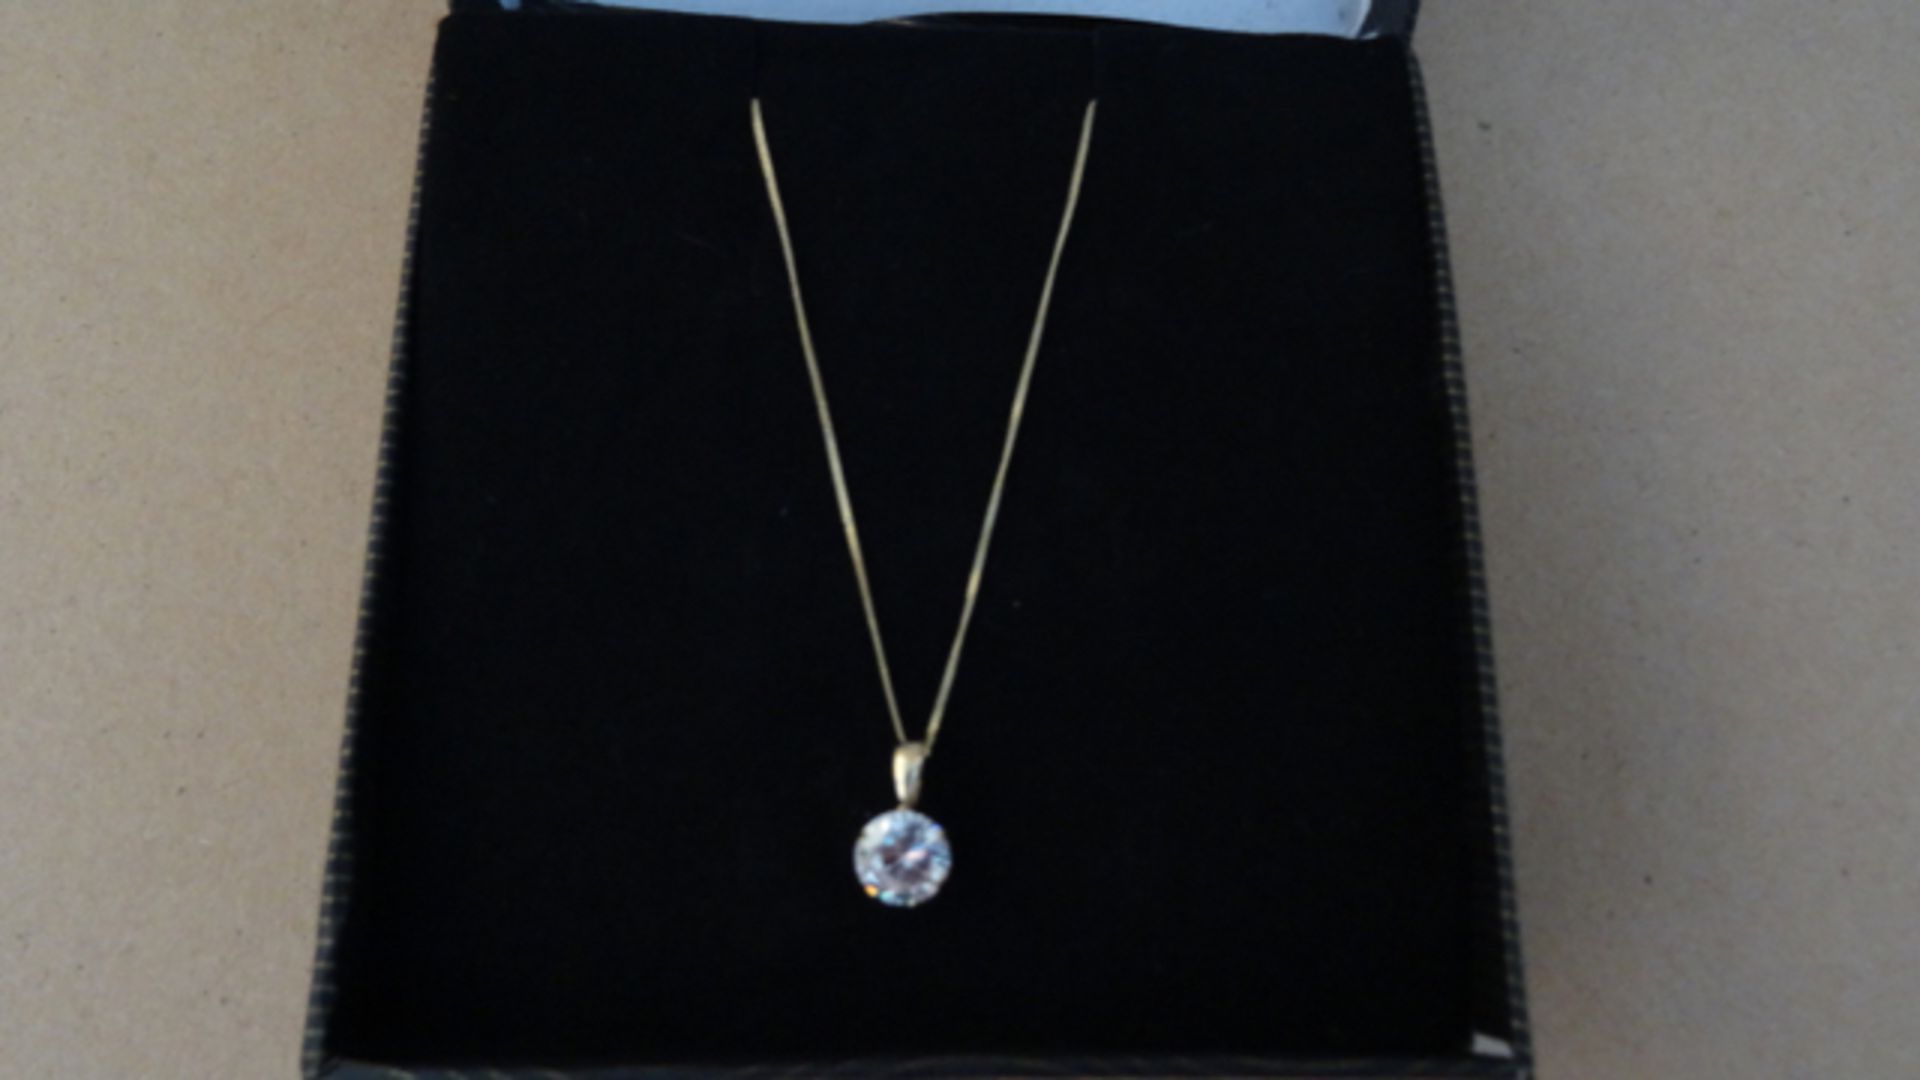 1 x 9 Carat Yellow Gold Chain with Cubic Zirconia Pendant. Retail value £79. UK TRACKED DELIVERY